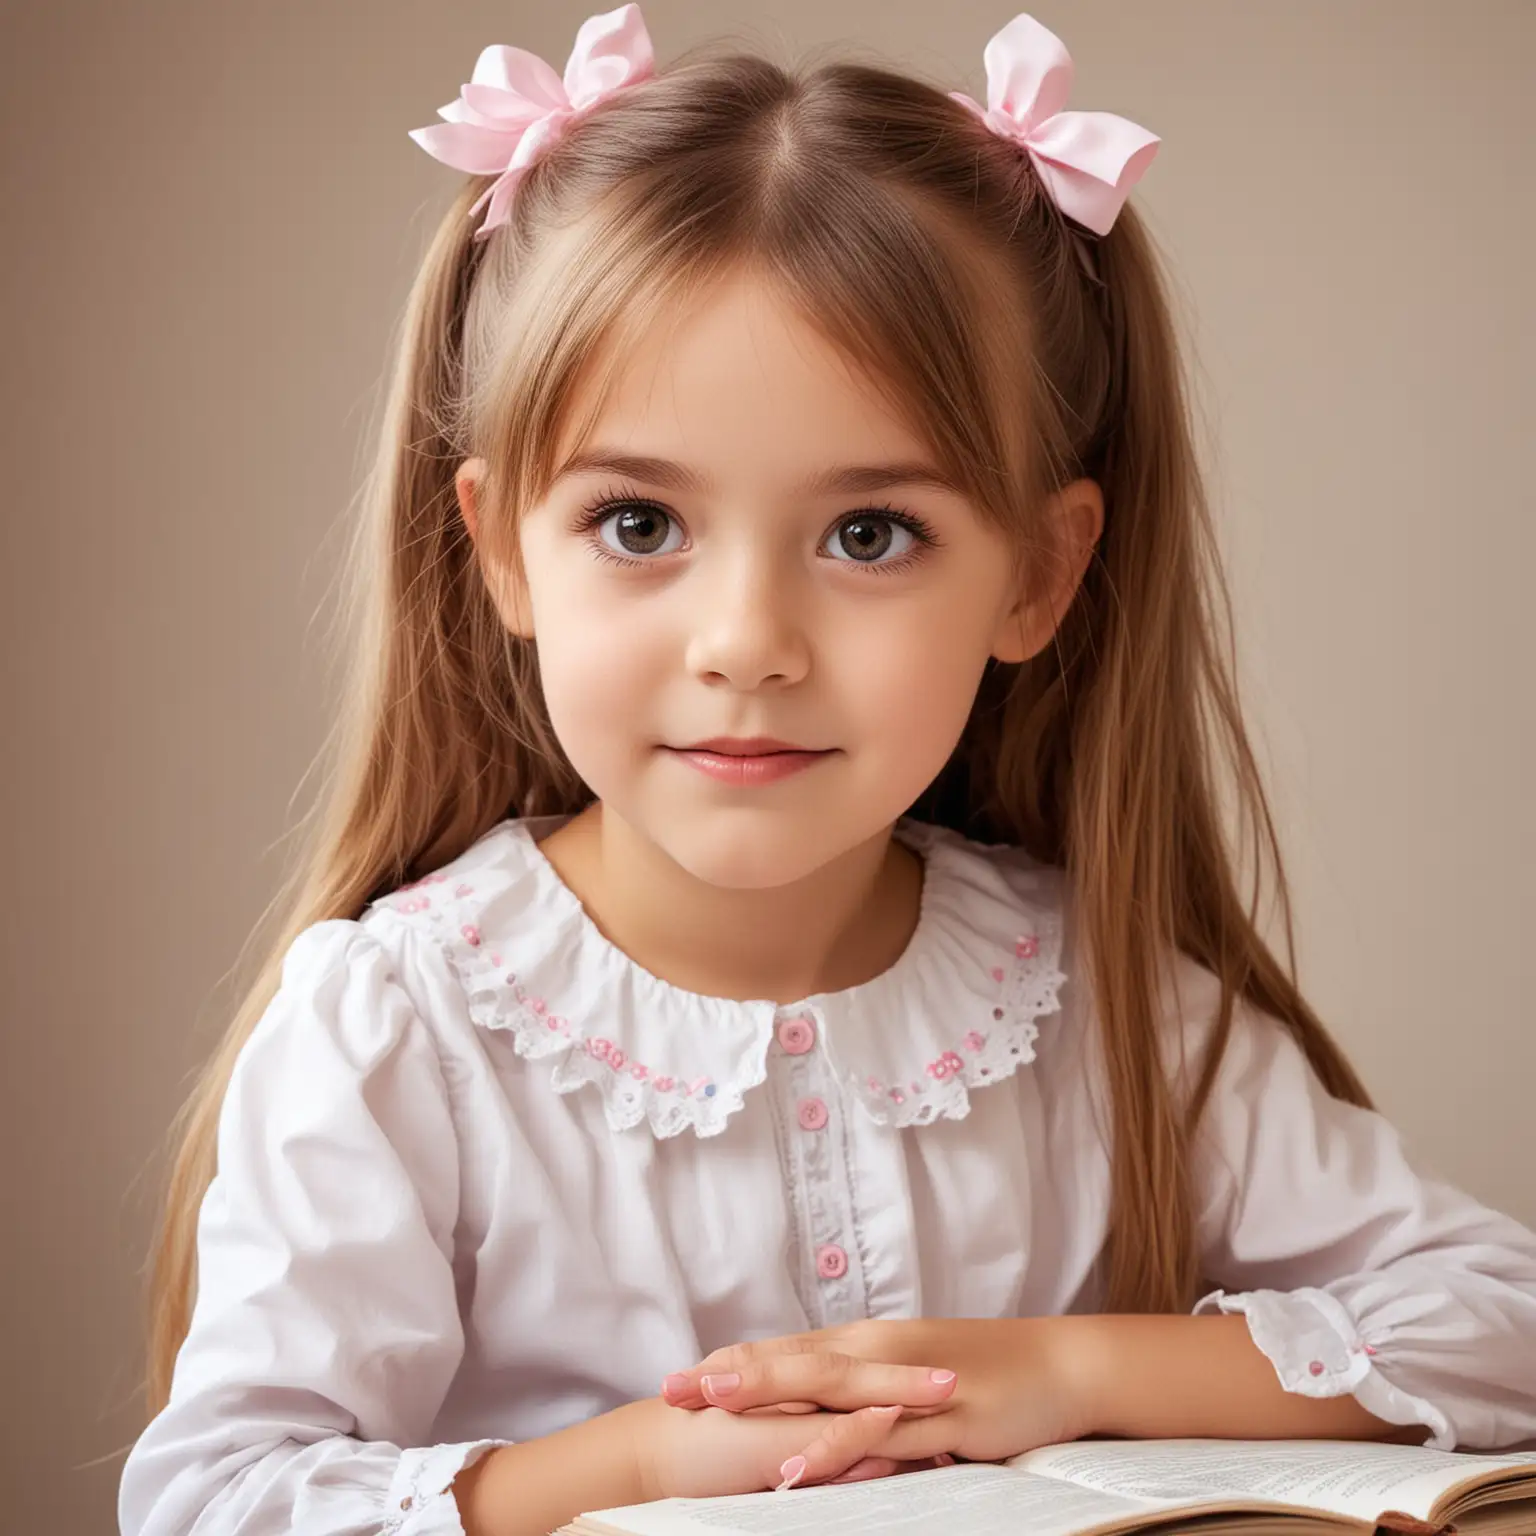 English language assistant, pretty and cute little girl